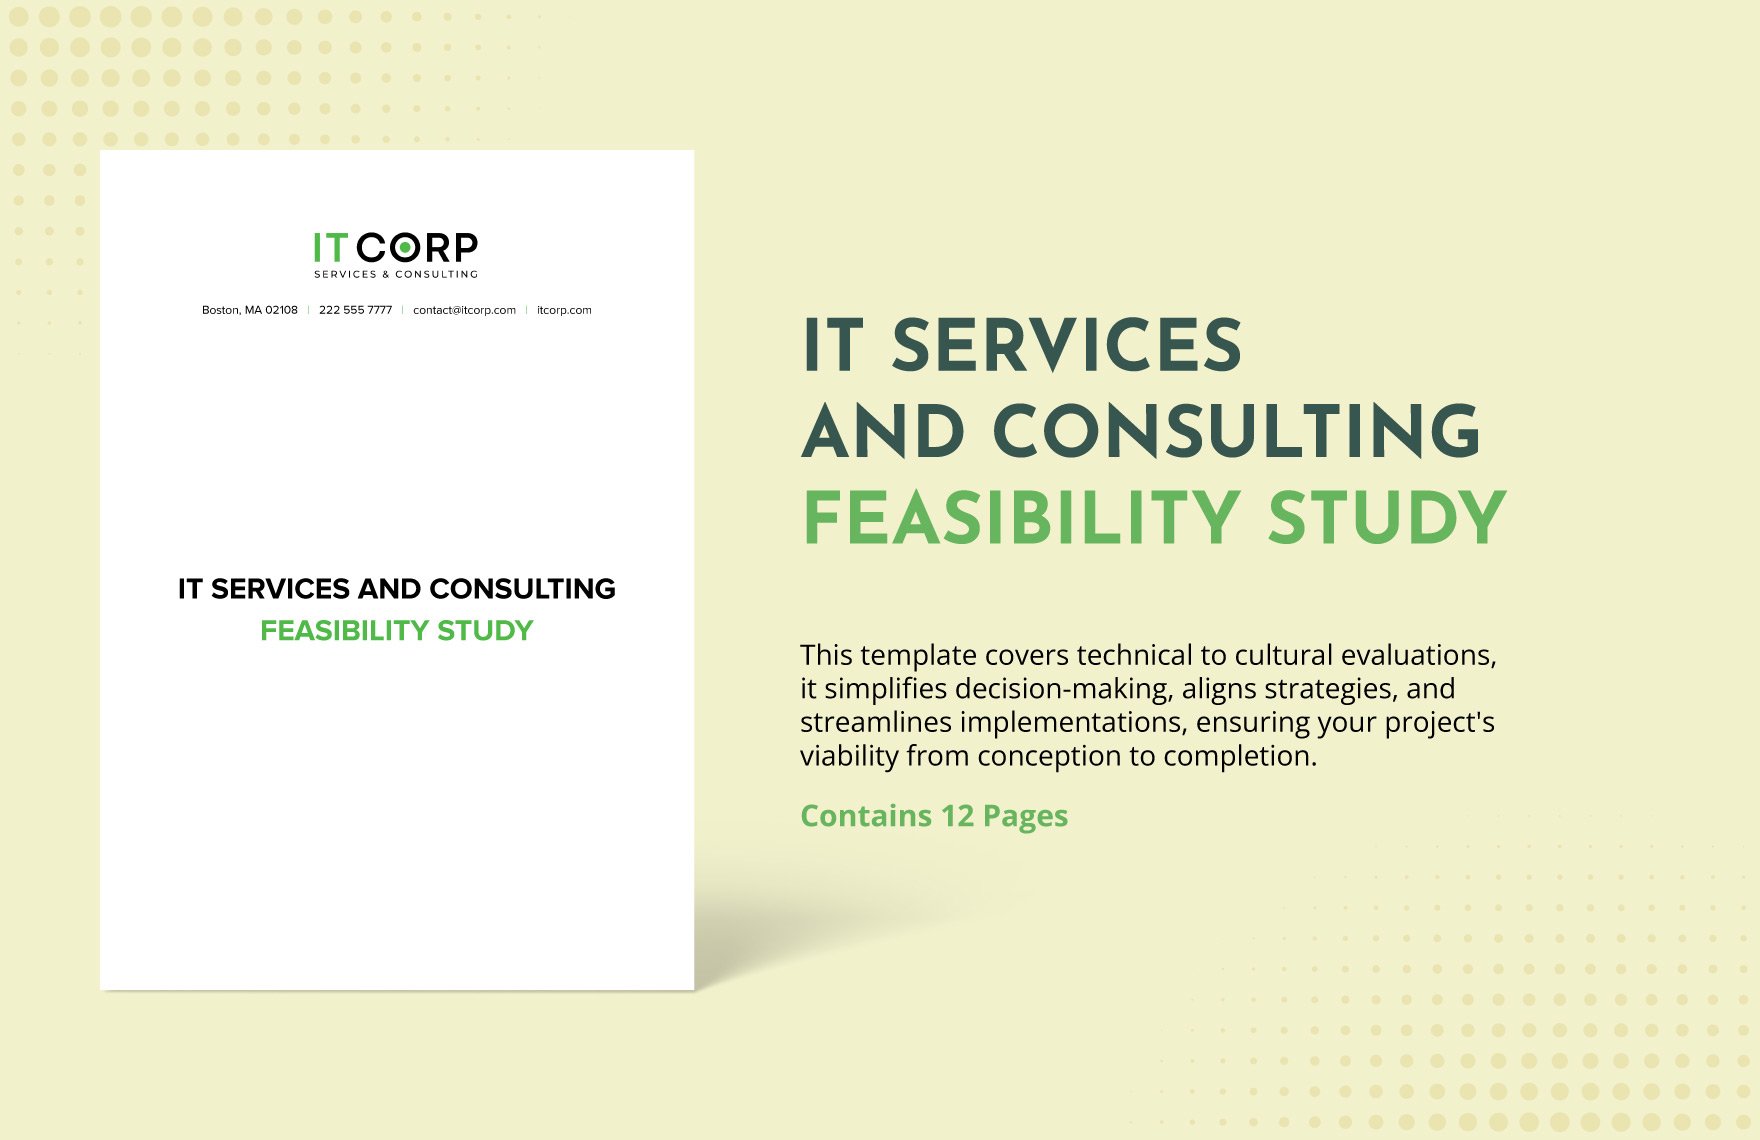 IT Services and Consulting Feasibility Study